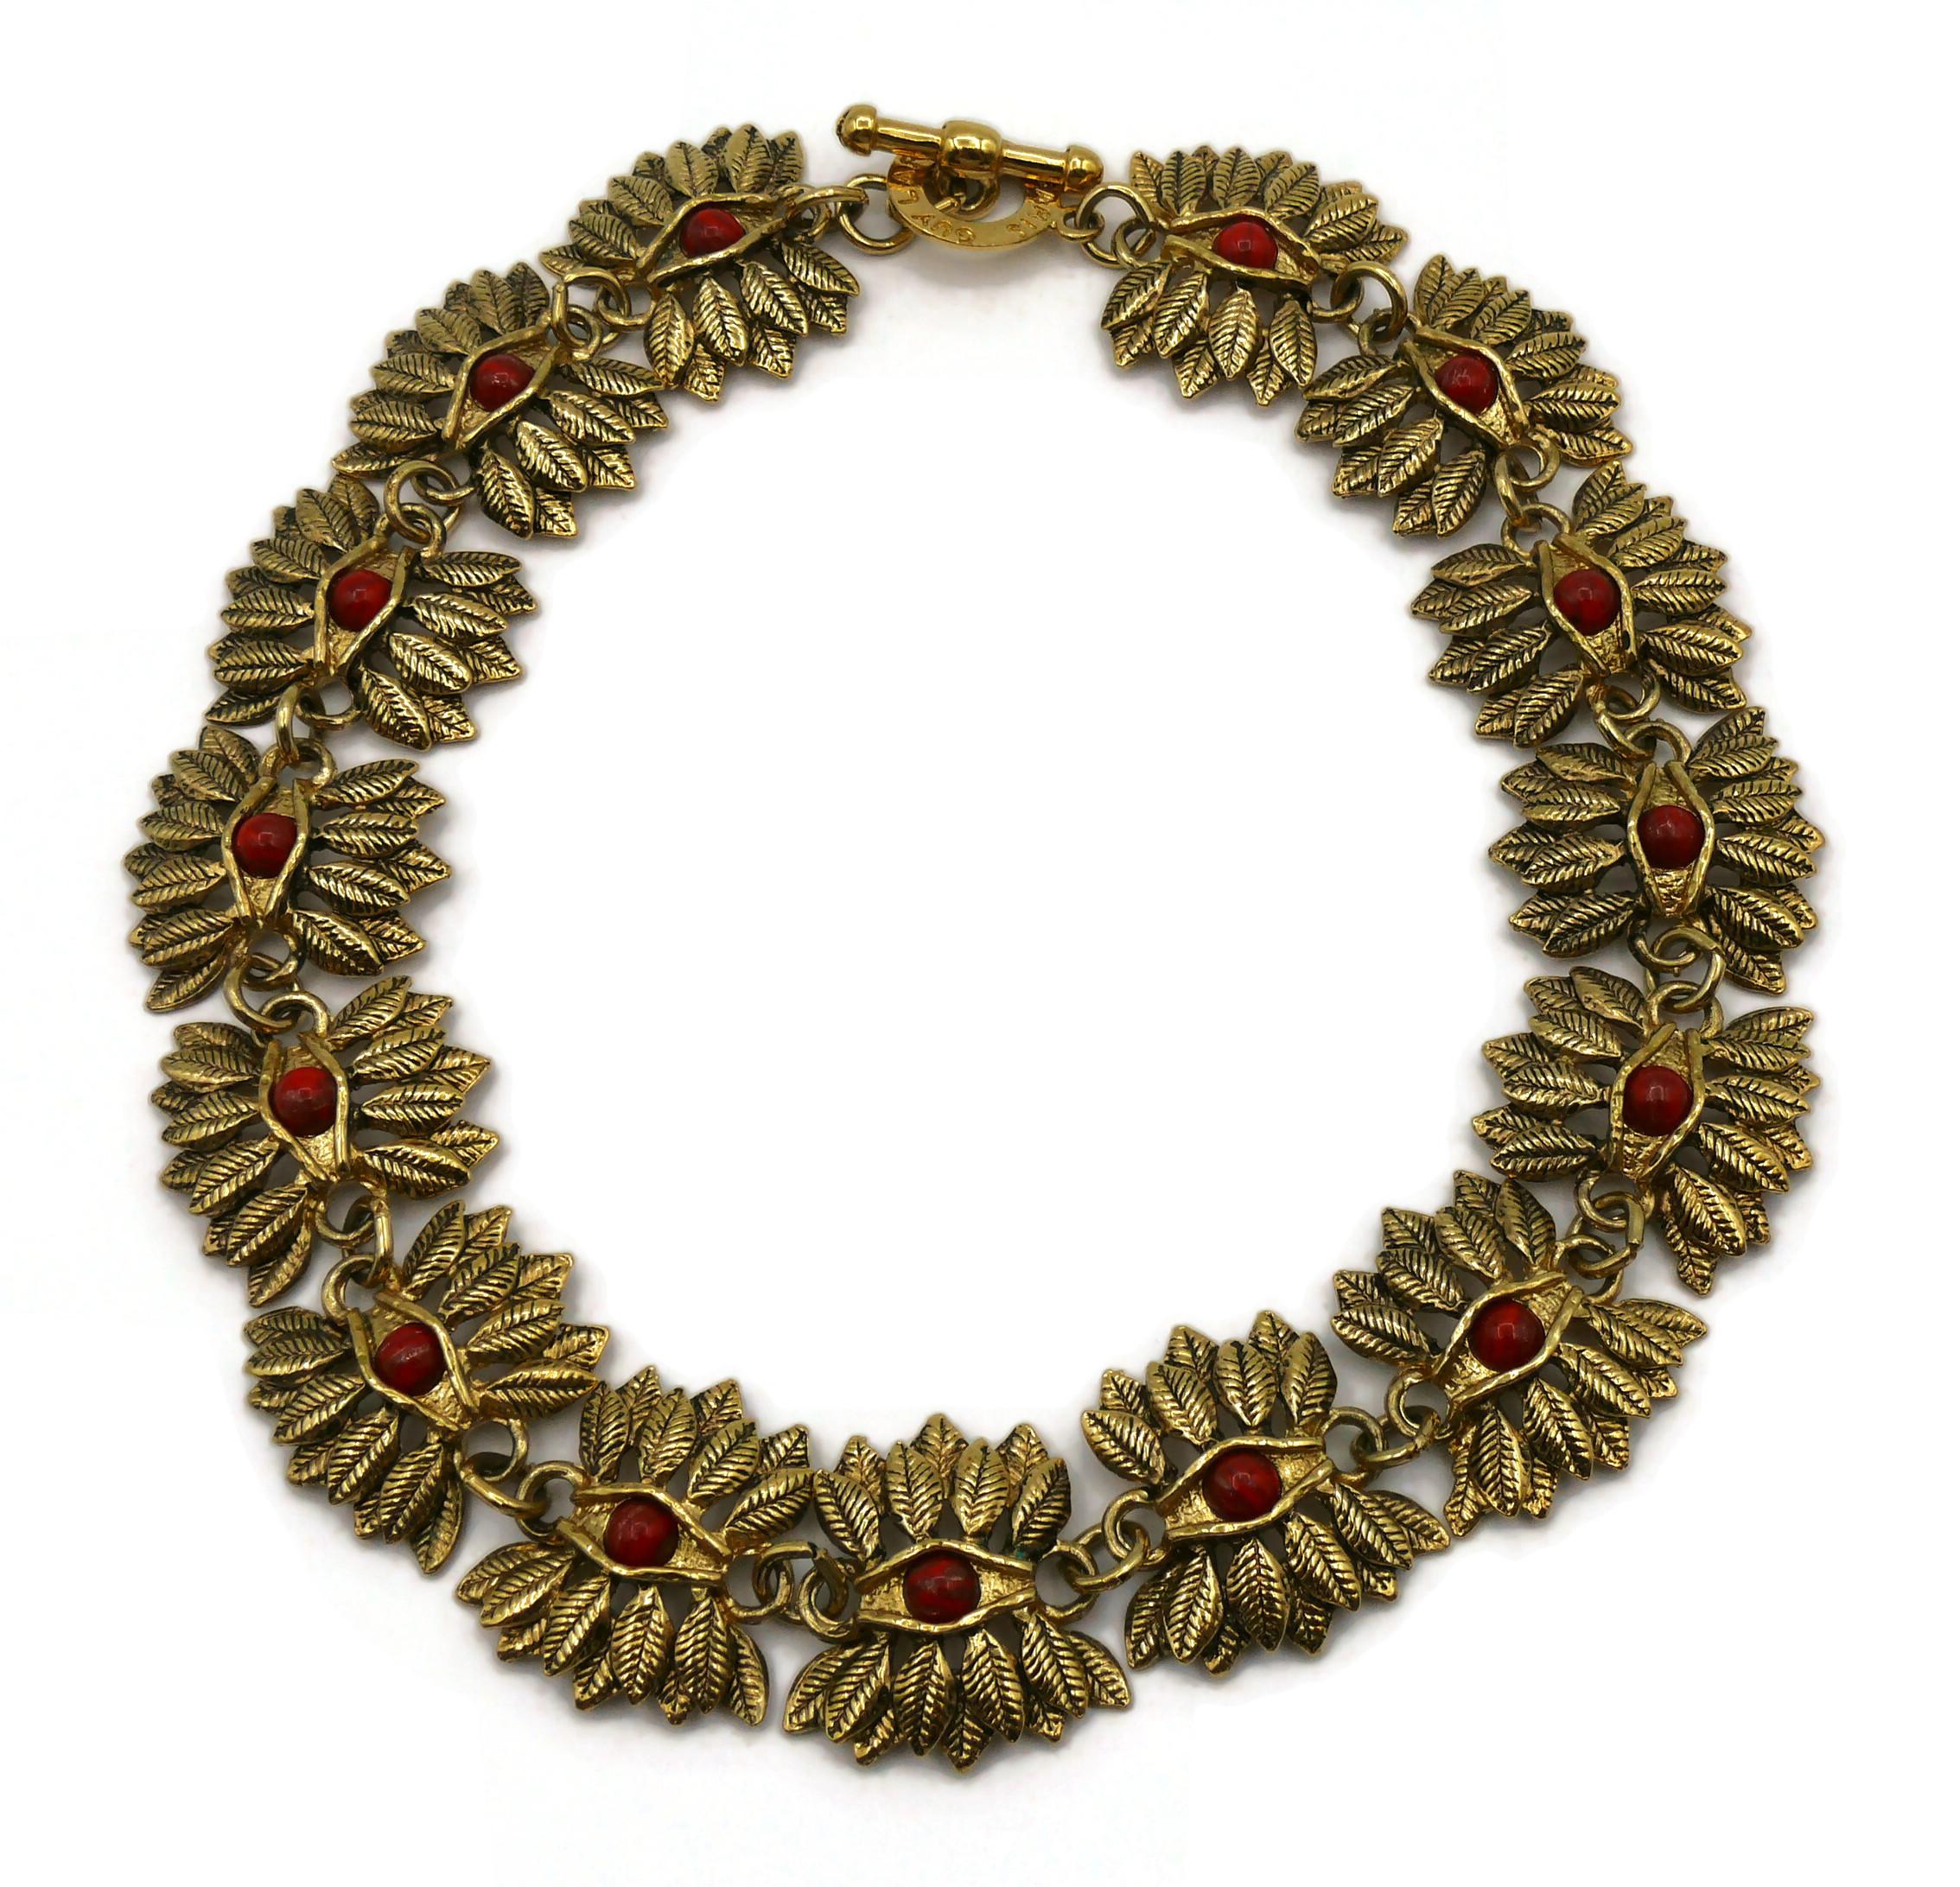 Women's GUY LAROCHE Vintage Eye and Feathers Links Necklace For Sale